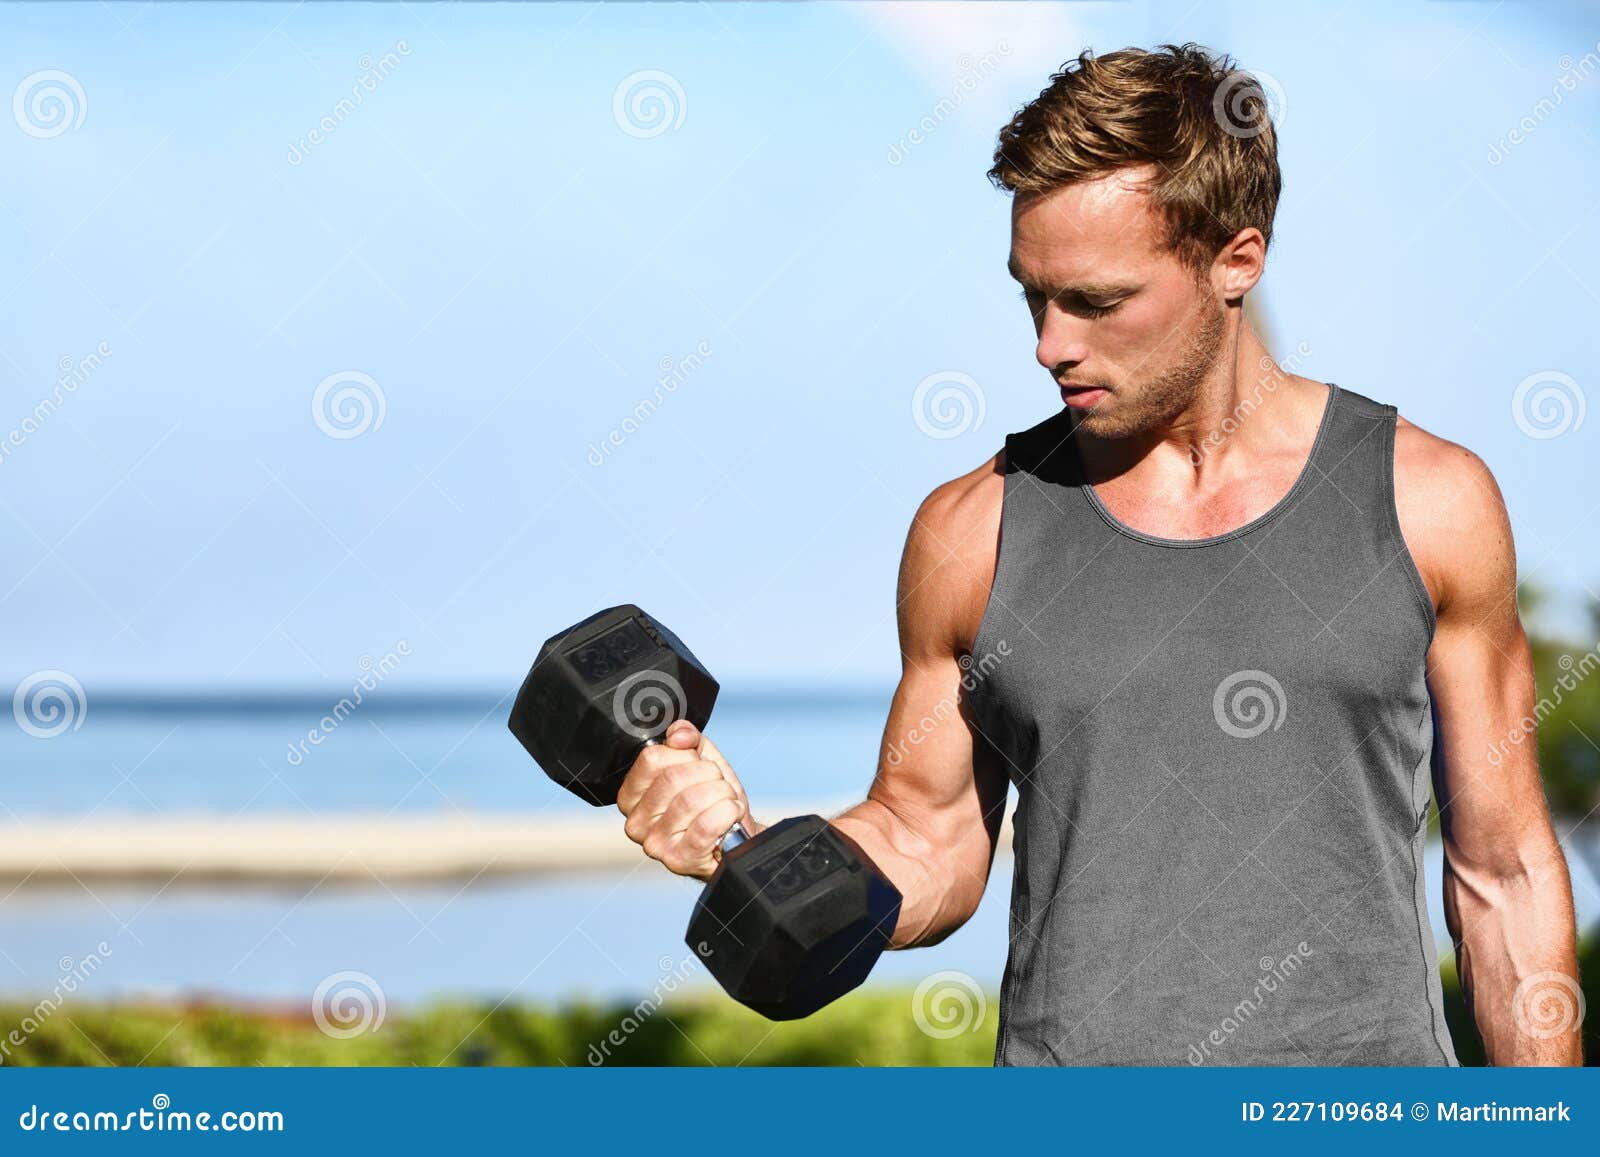 https://thumbs.dreamstime.com/z/bicep-curl-free-weights-training-fitness-man-outside-working-out-arms-lifting-dumbbells-doing-biceps-curls-fit-man-arm-bicep-curl-227109684.jpg